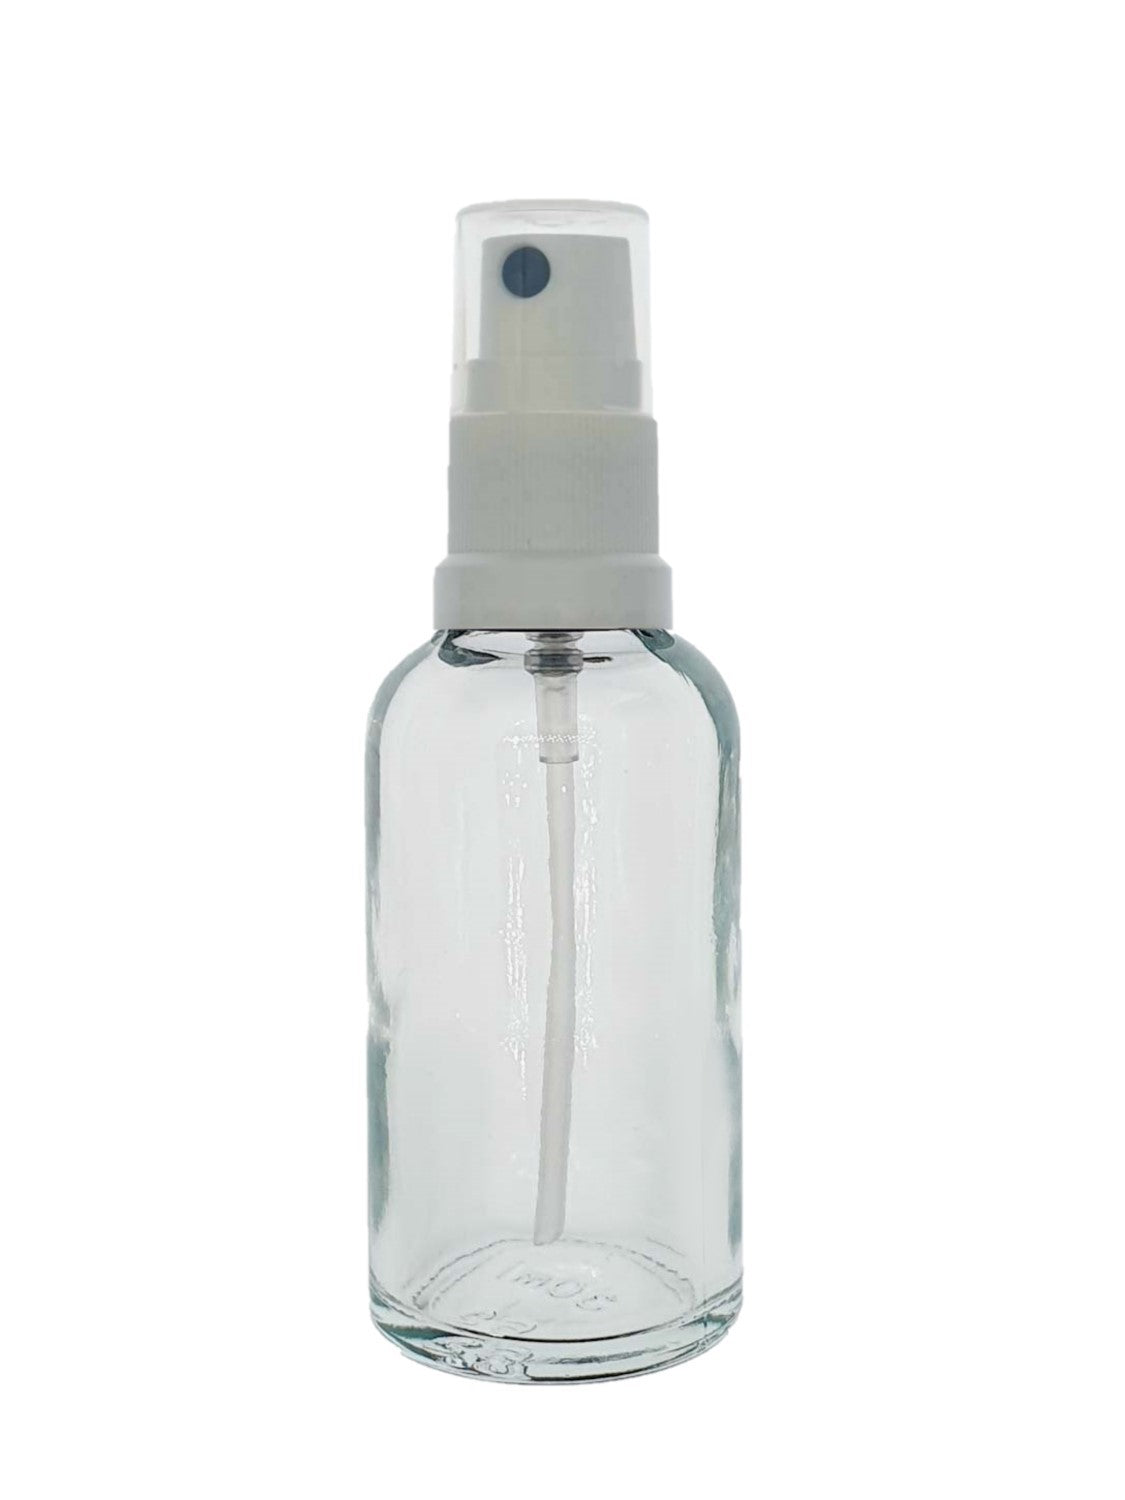 30ml Clear Glass Bottles with White Atomiser Spray and Clear Overcap